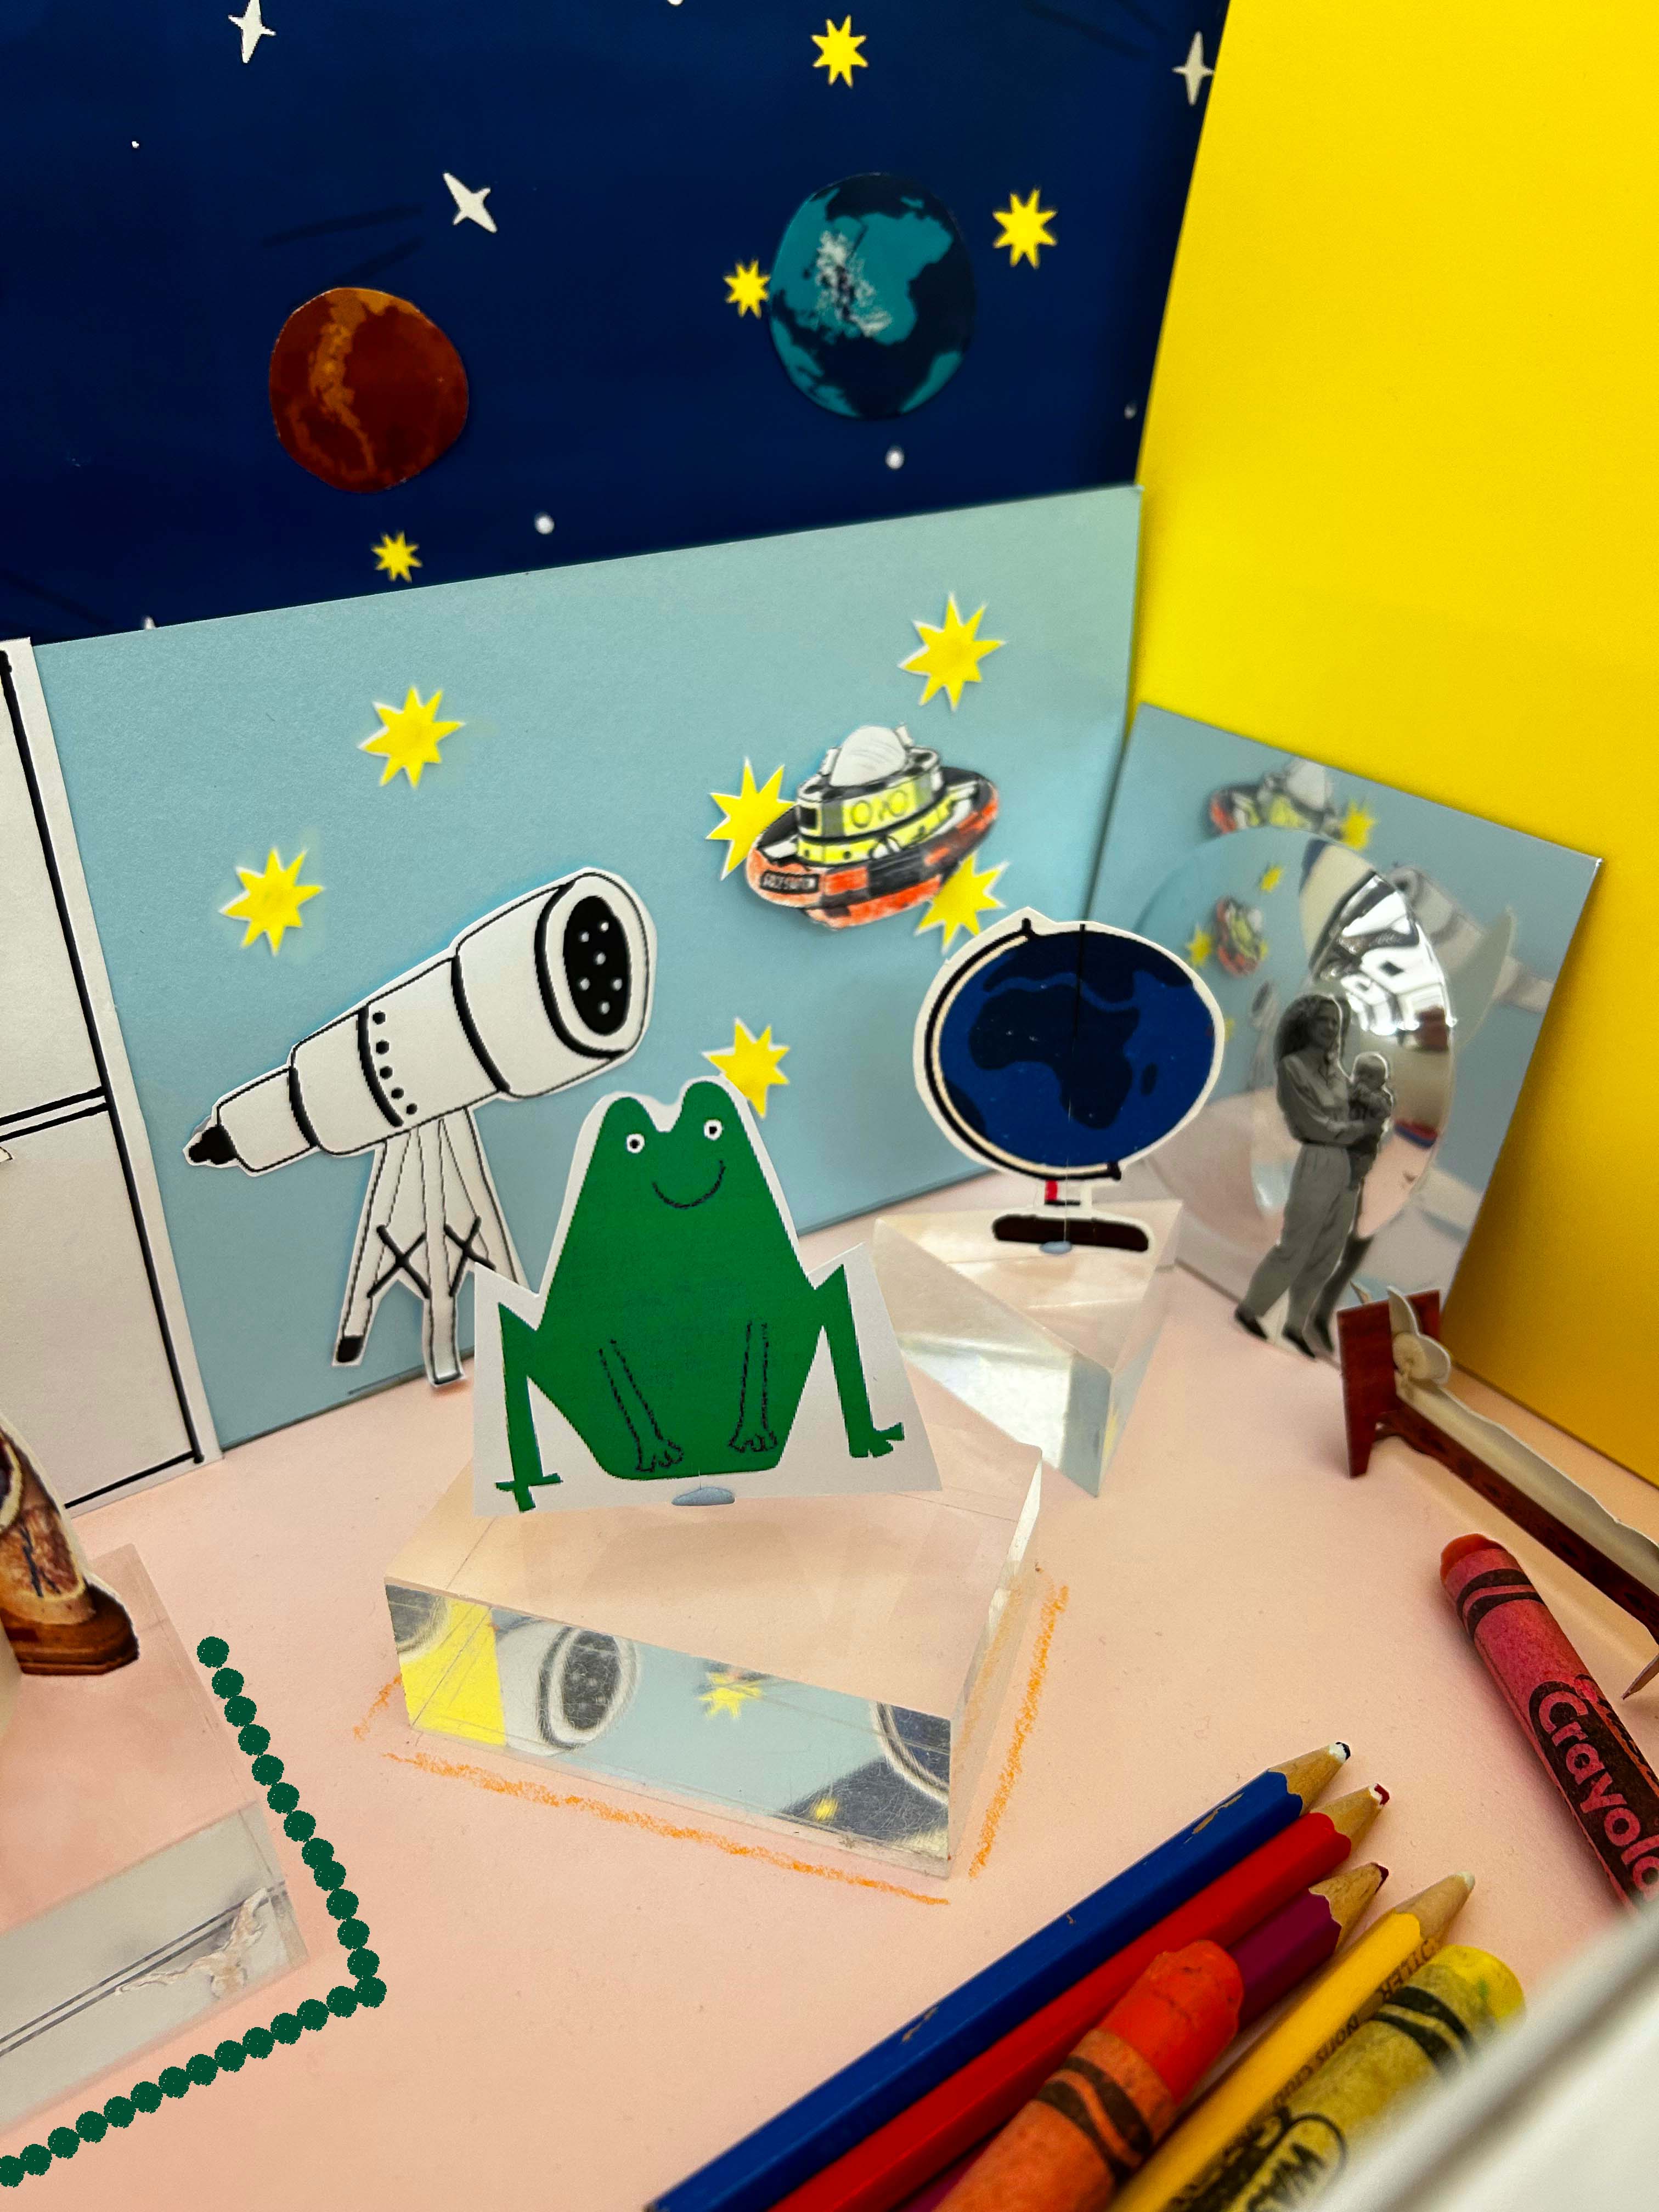 A mini model of a museum, for a educational family activity. Showing a model frog, the solar system, a globe and craft supplies.